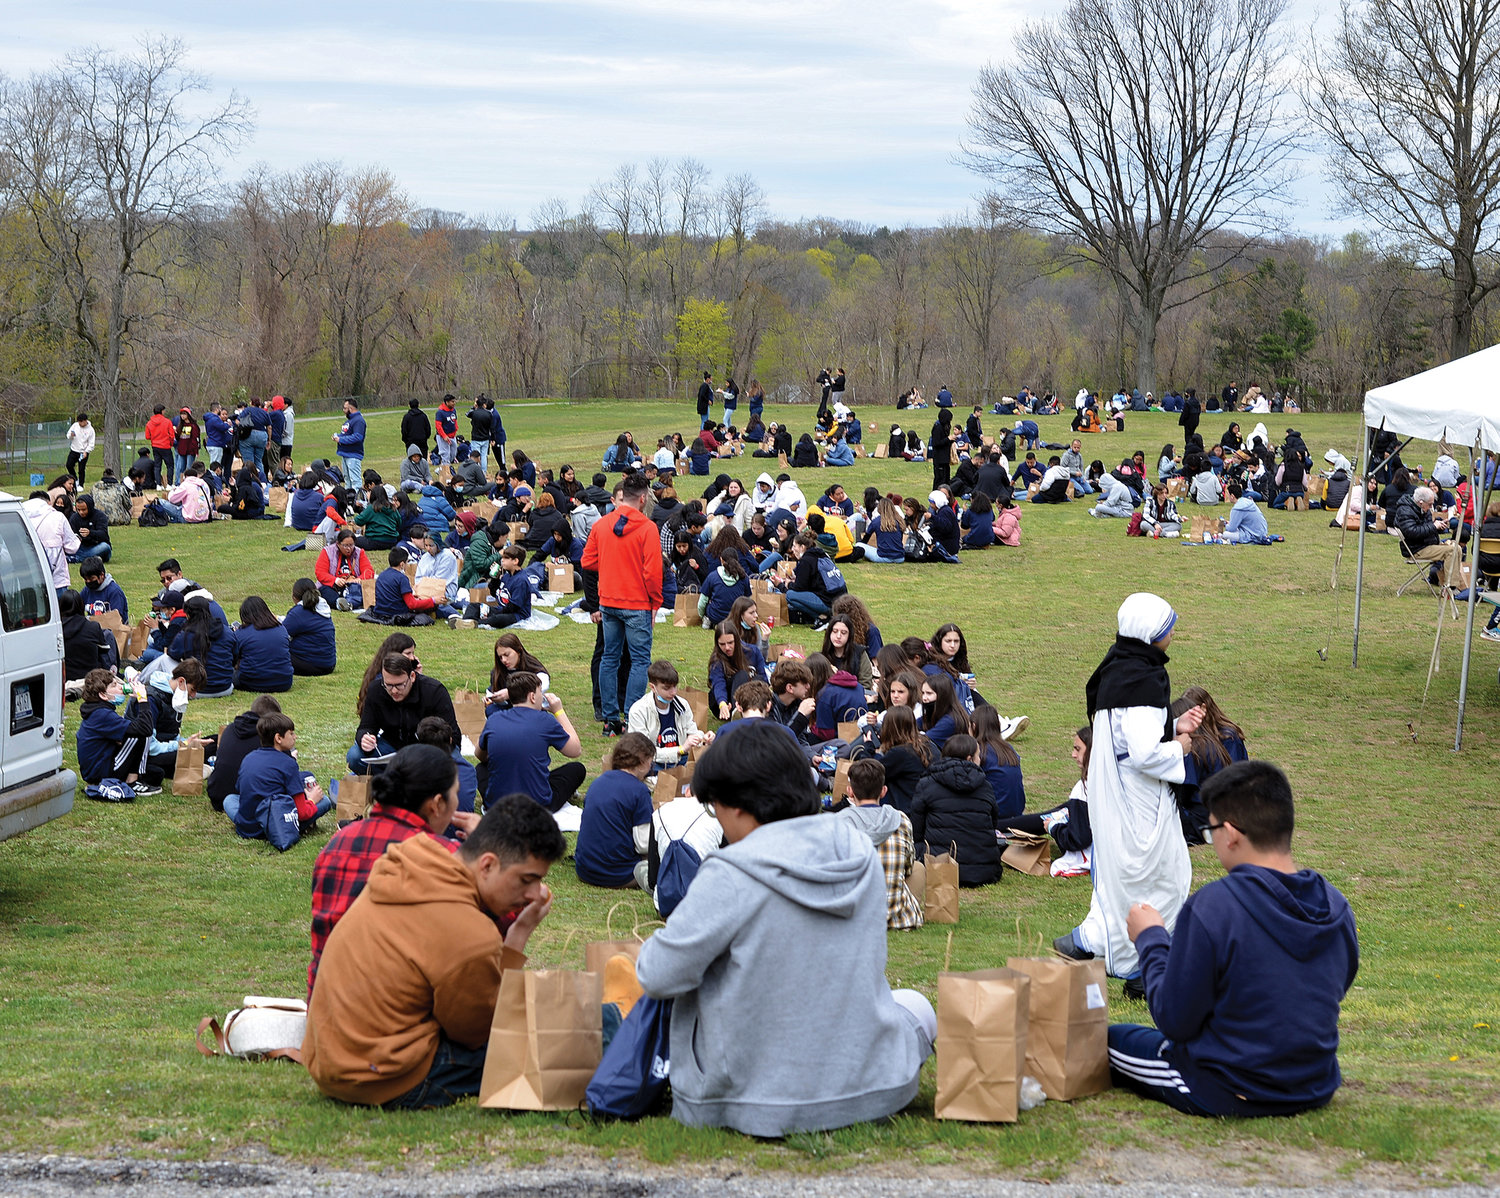 Teens gather outside for lunch during New York Catholic Youth Day at St. Joseph's Seminary, Dunwoodie. About 700 young people attended the daylong event April 23.